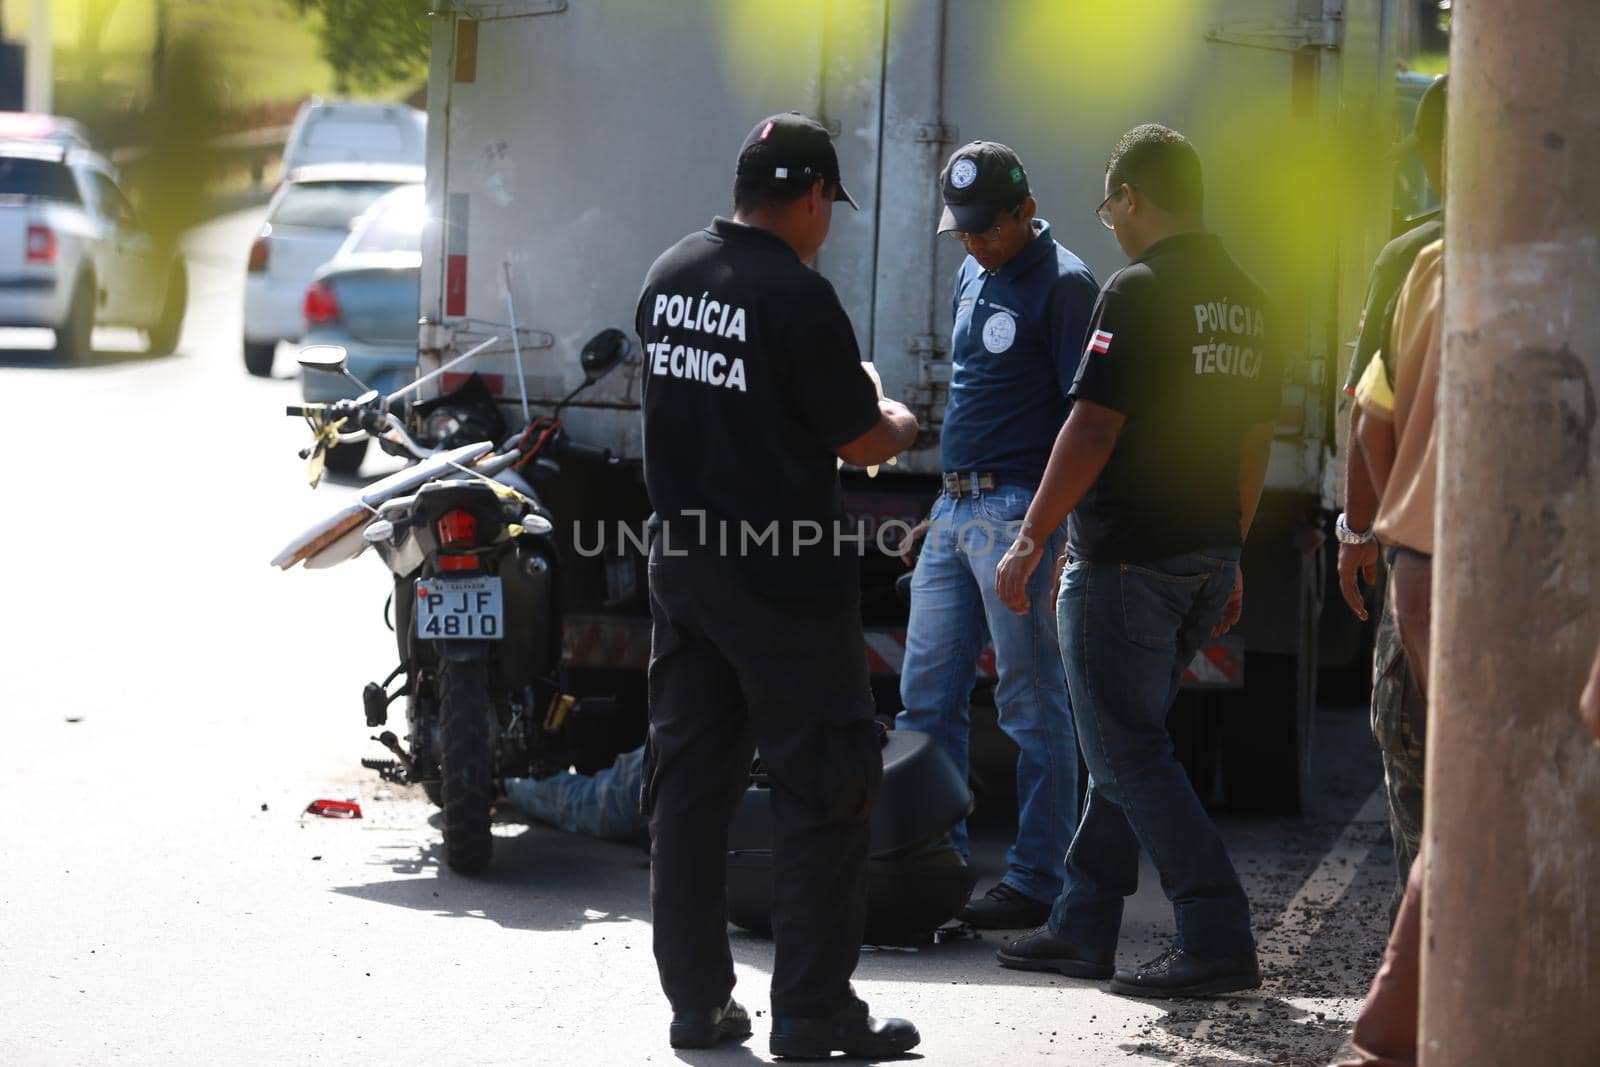 salvador, bahia / brazil - june 18, 2015: Technical Police forensic in traffic accident on Luiz Viana Avenue in Salvador. A man died while colliding a motorcycle in the bottom of a truck.